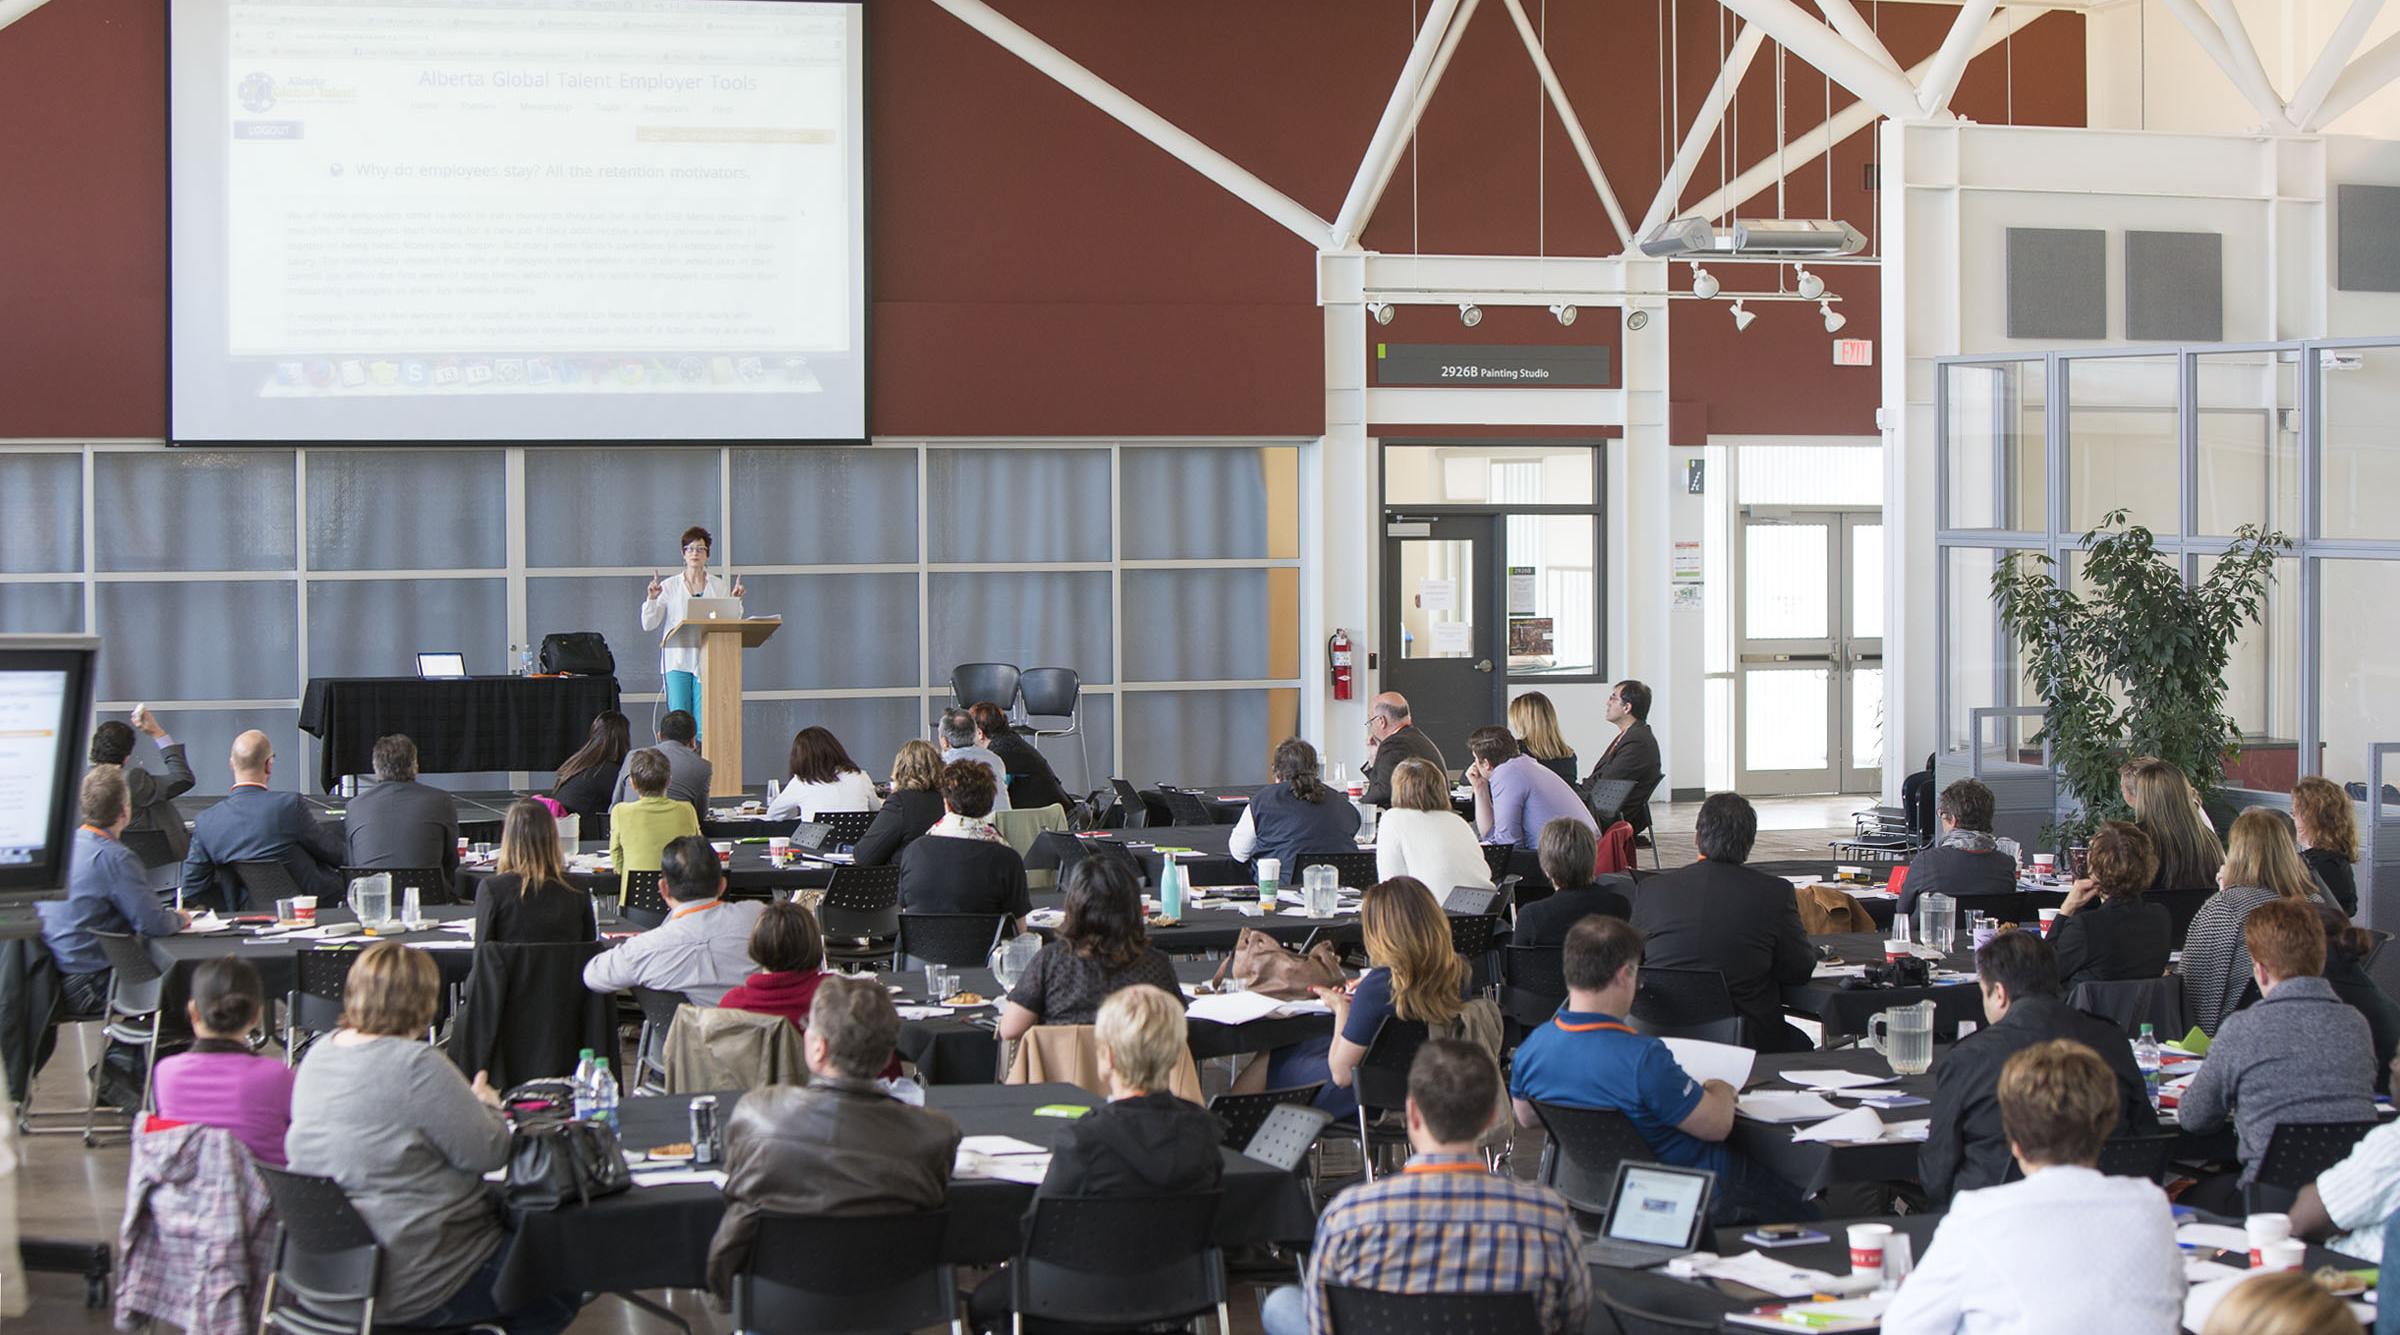 RDP hosts conferences and events in facilities such as the Cenovus Energy Learning Common